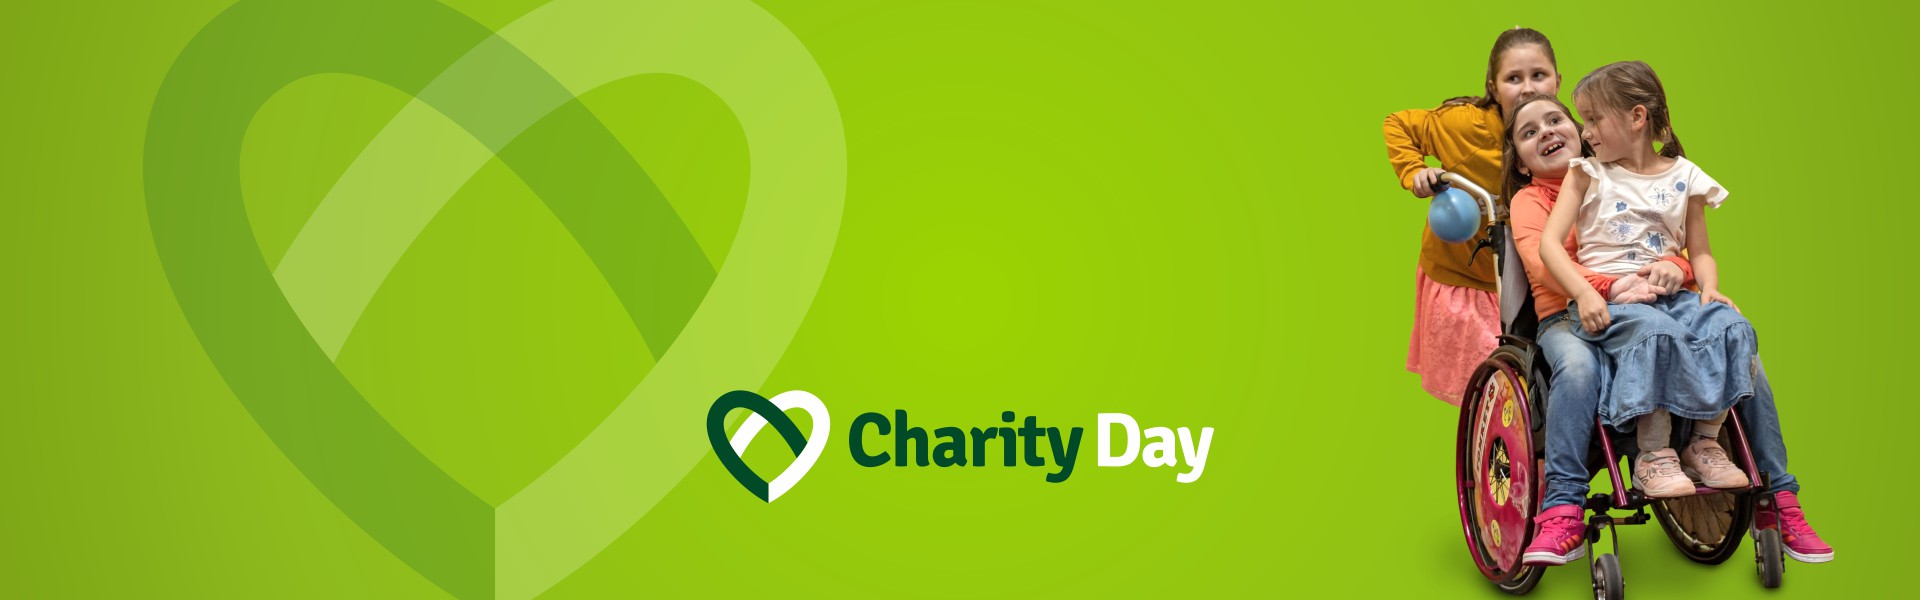 Charity day